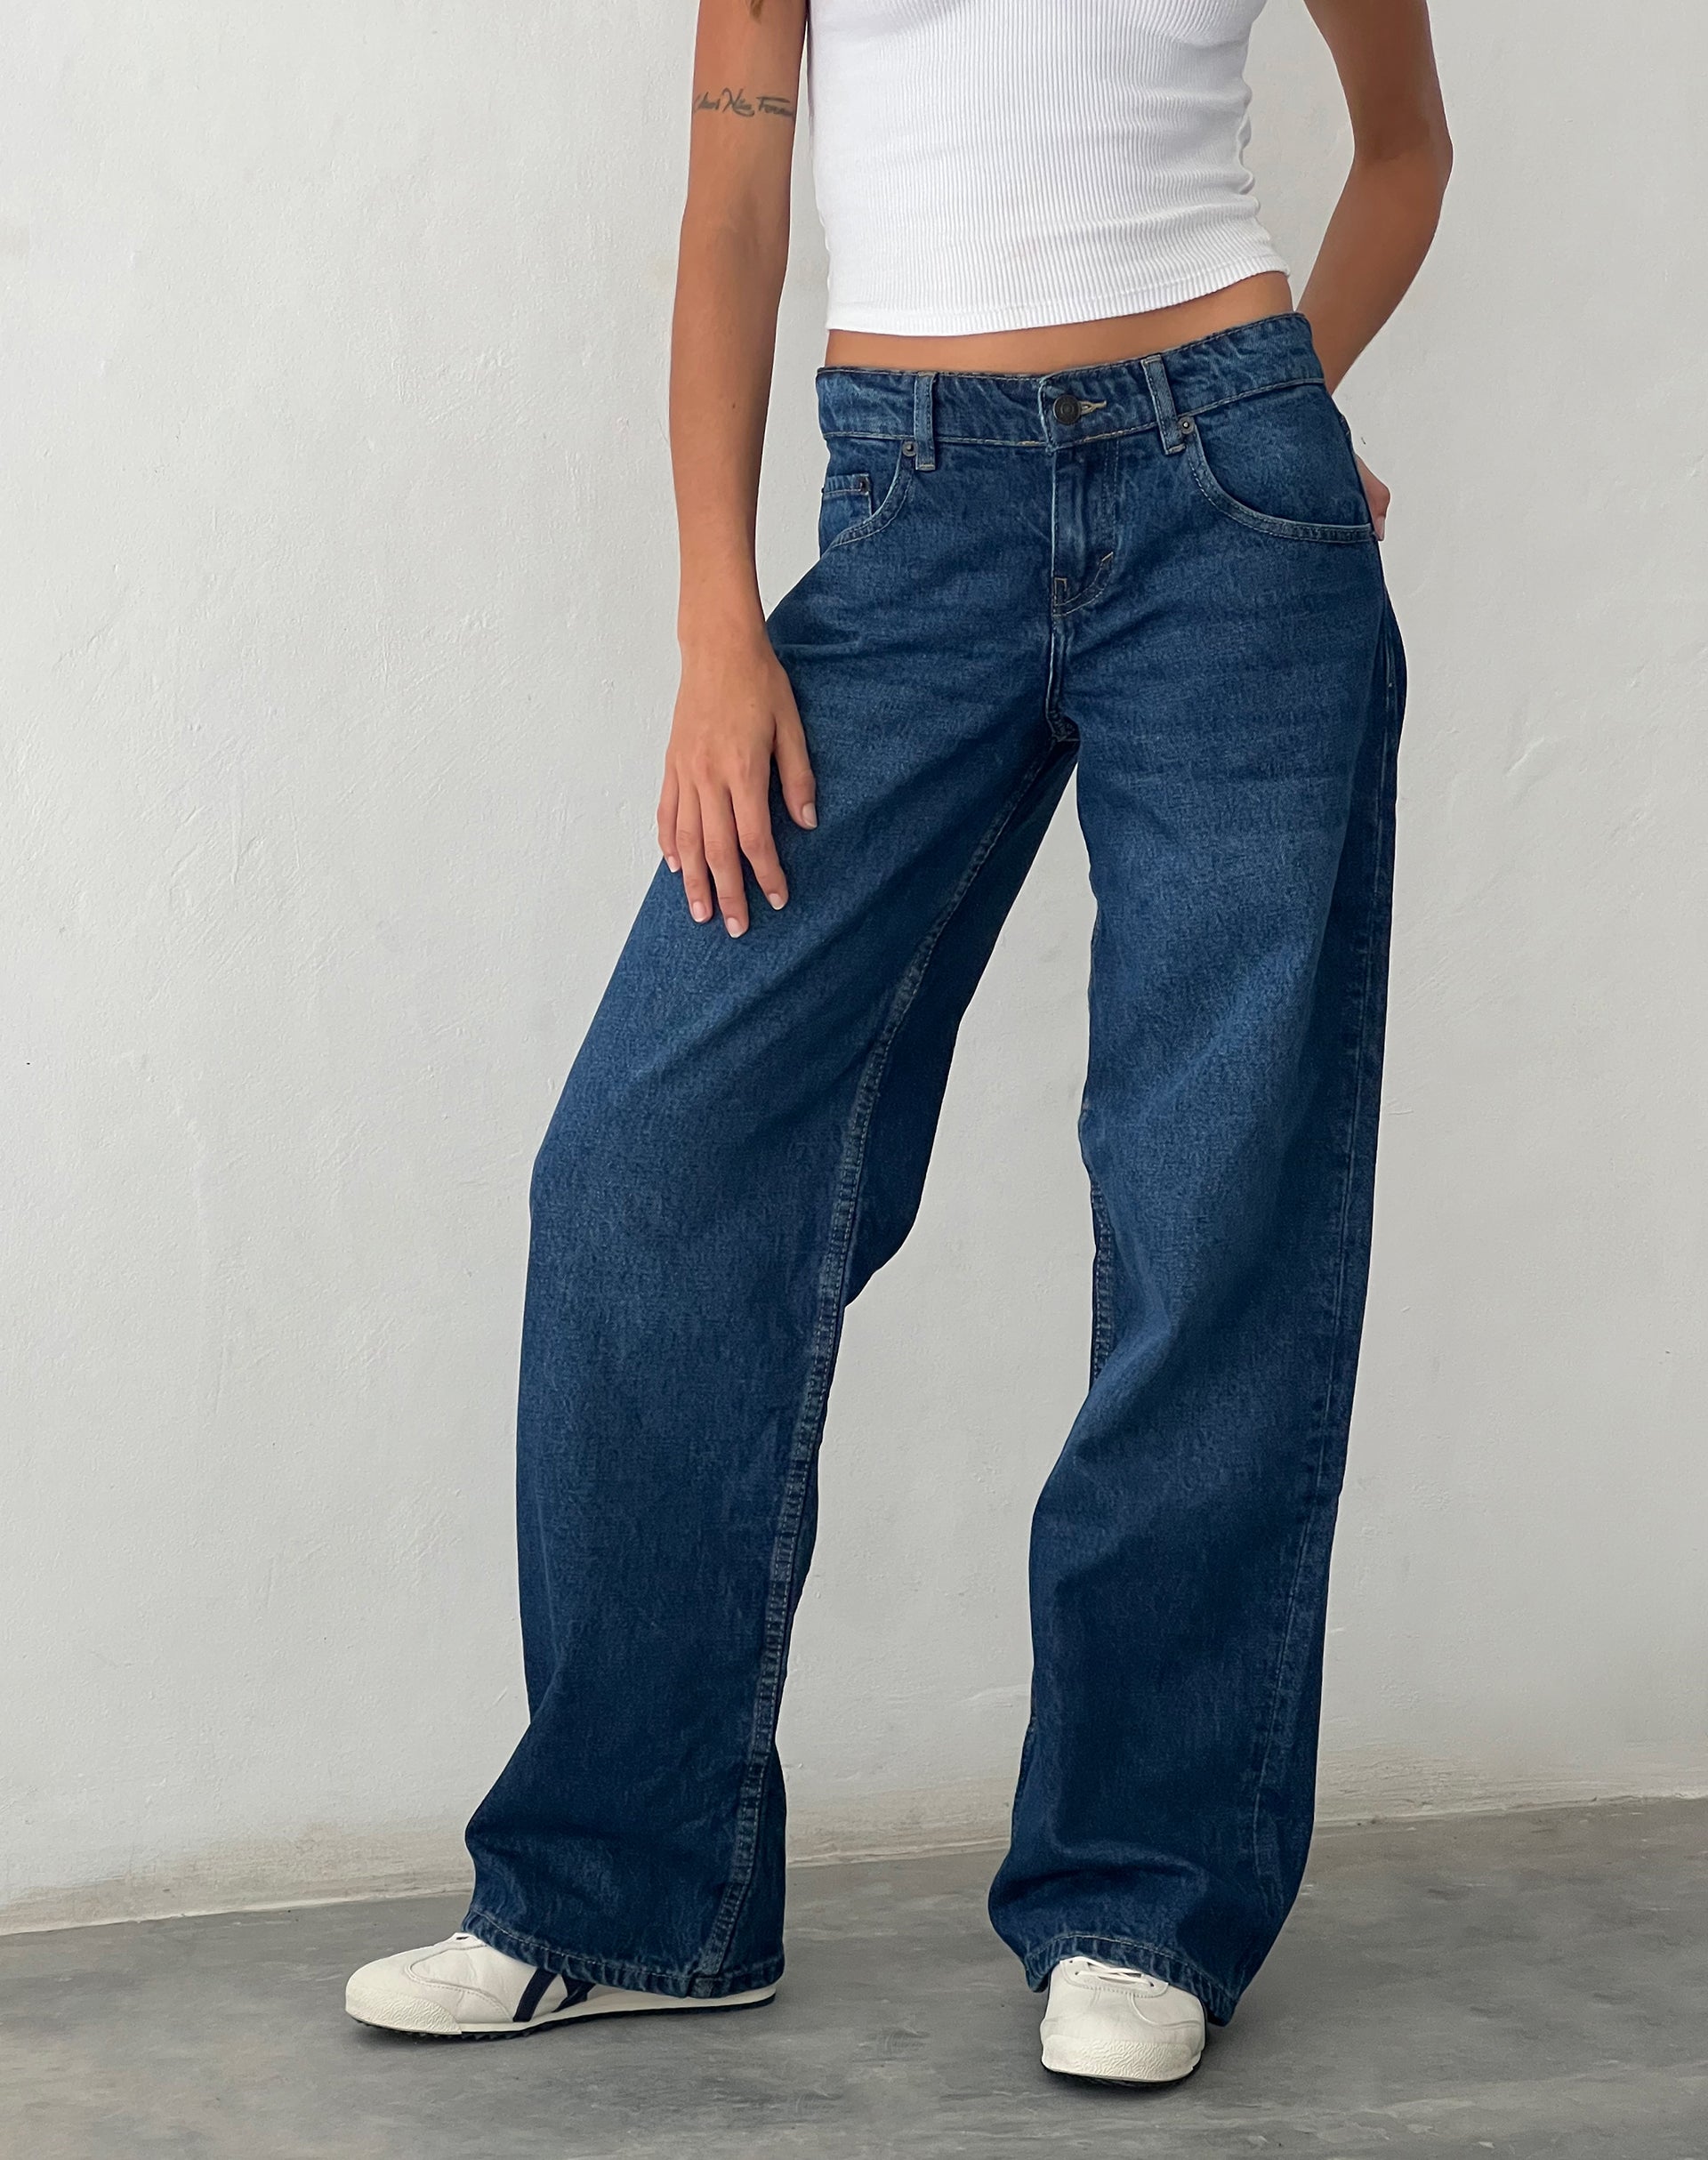 Chic Patchwork Denim Flared Wide Leg Parallel Jeans For Women For Women  Casual Streetwear Style 231023 From Bian02, $25.32 | DHgate.Com